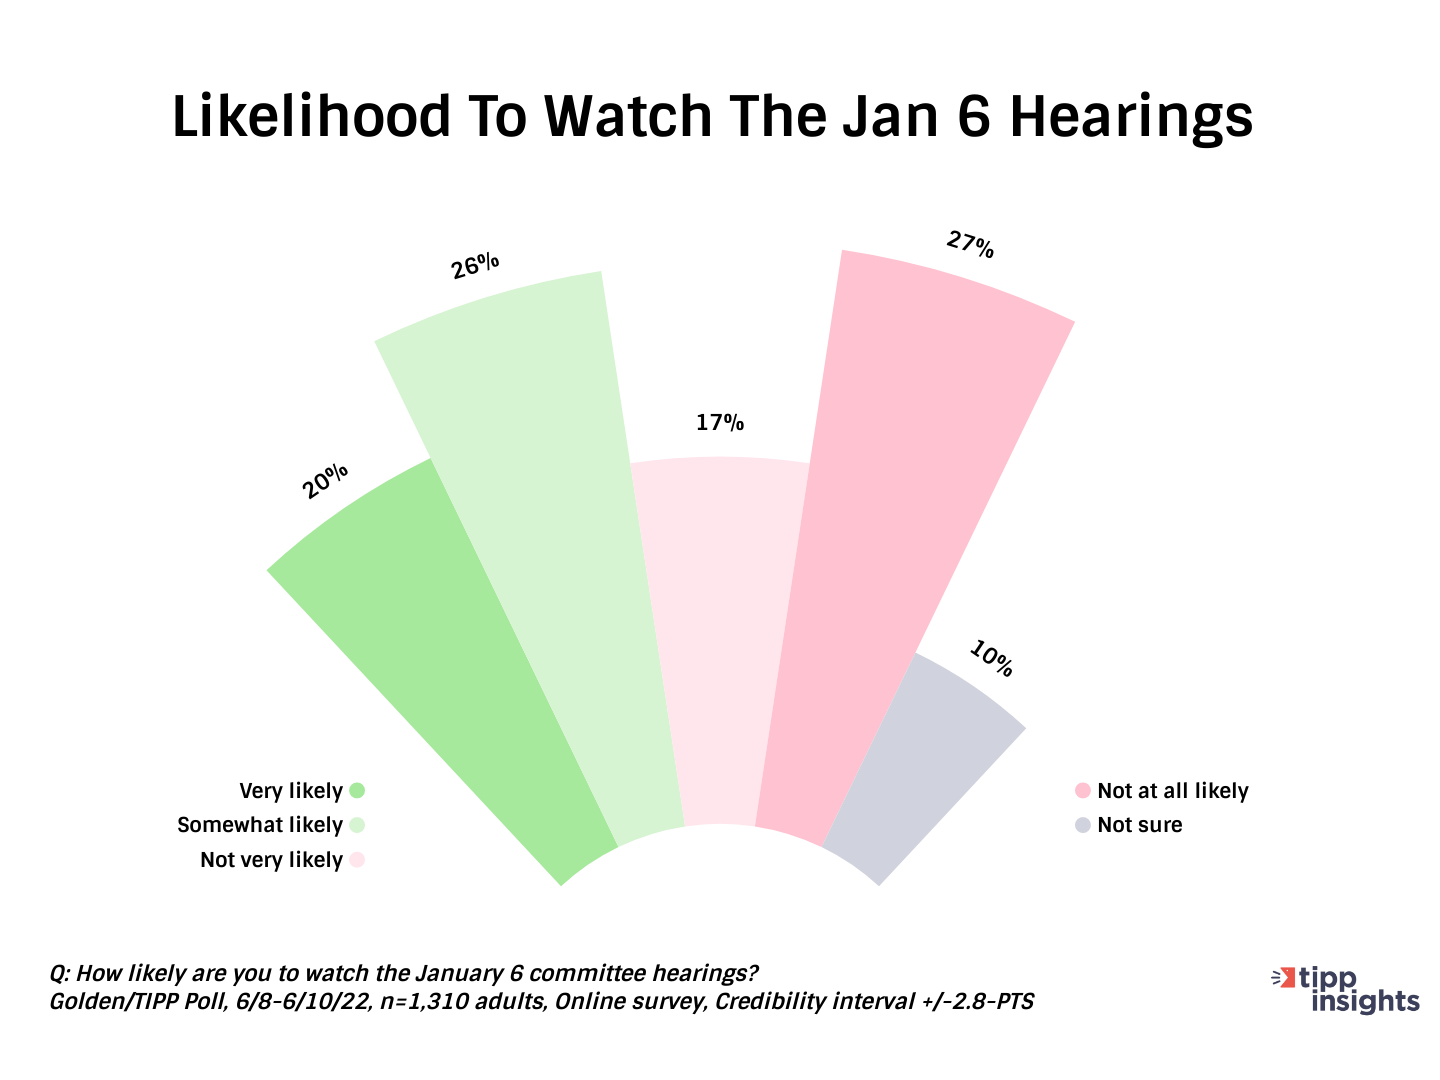 Golden/TIPP Poll results: Likelihood of Americans to watch January 6th Hearings